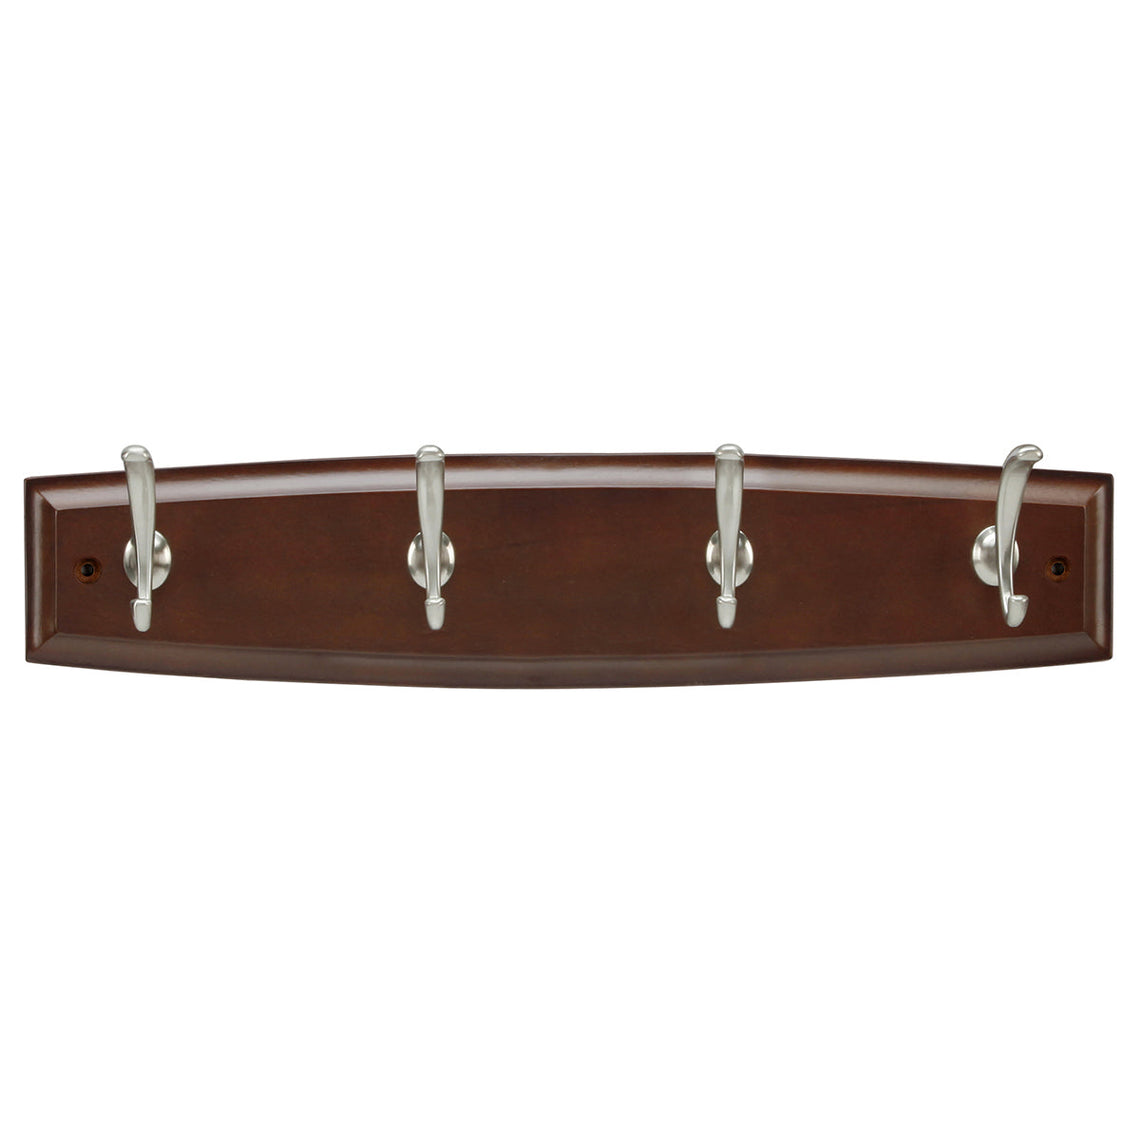 Hook Rail 18 Inch Long In Cherry Stained with Satin Nickel - Hickory Hardware